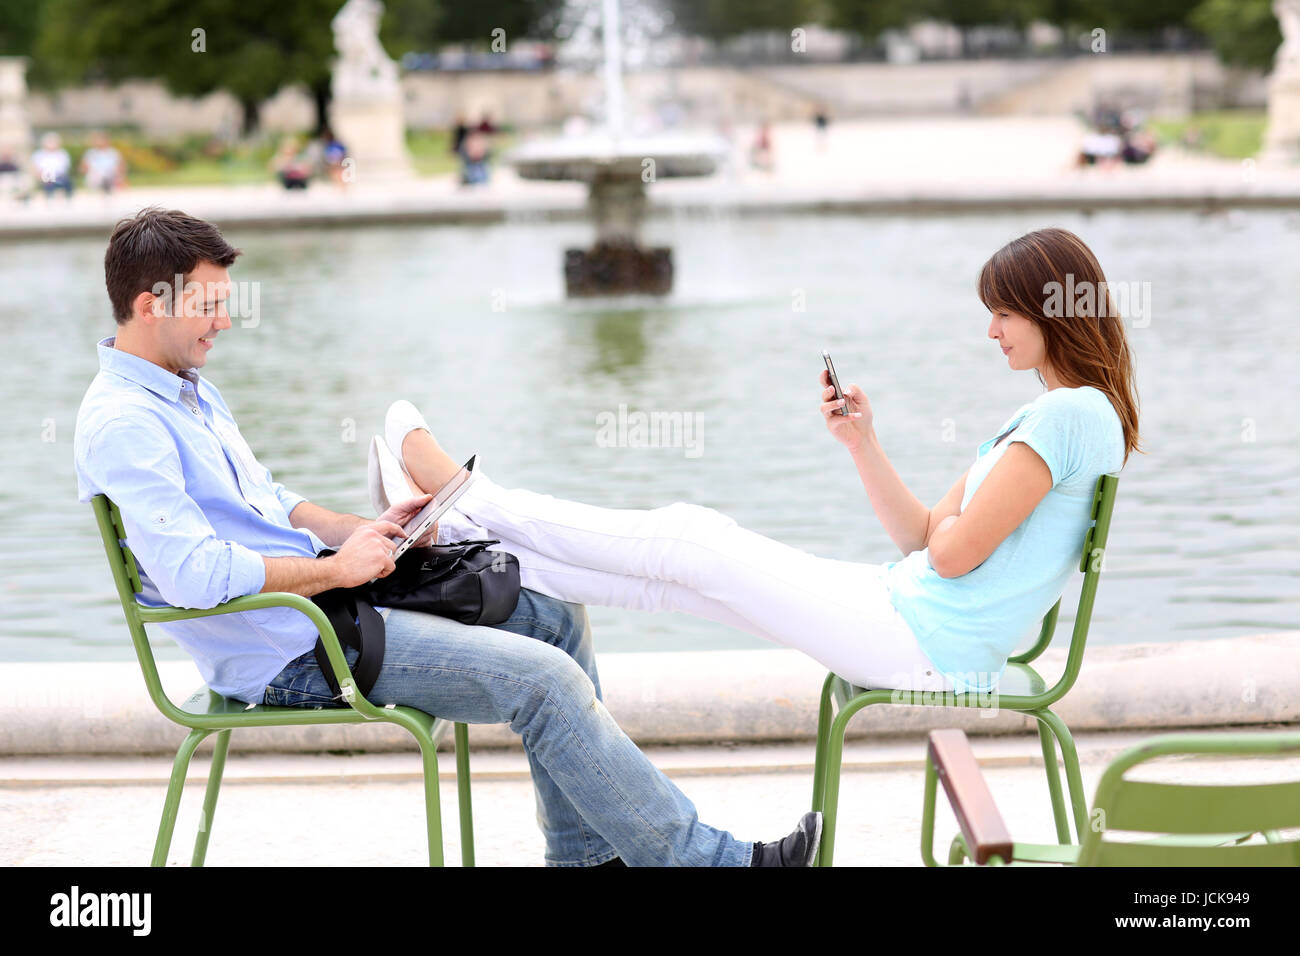 Couple relaxing in chairs in public park Stock Photo